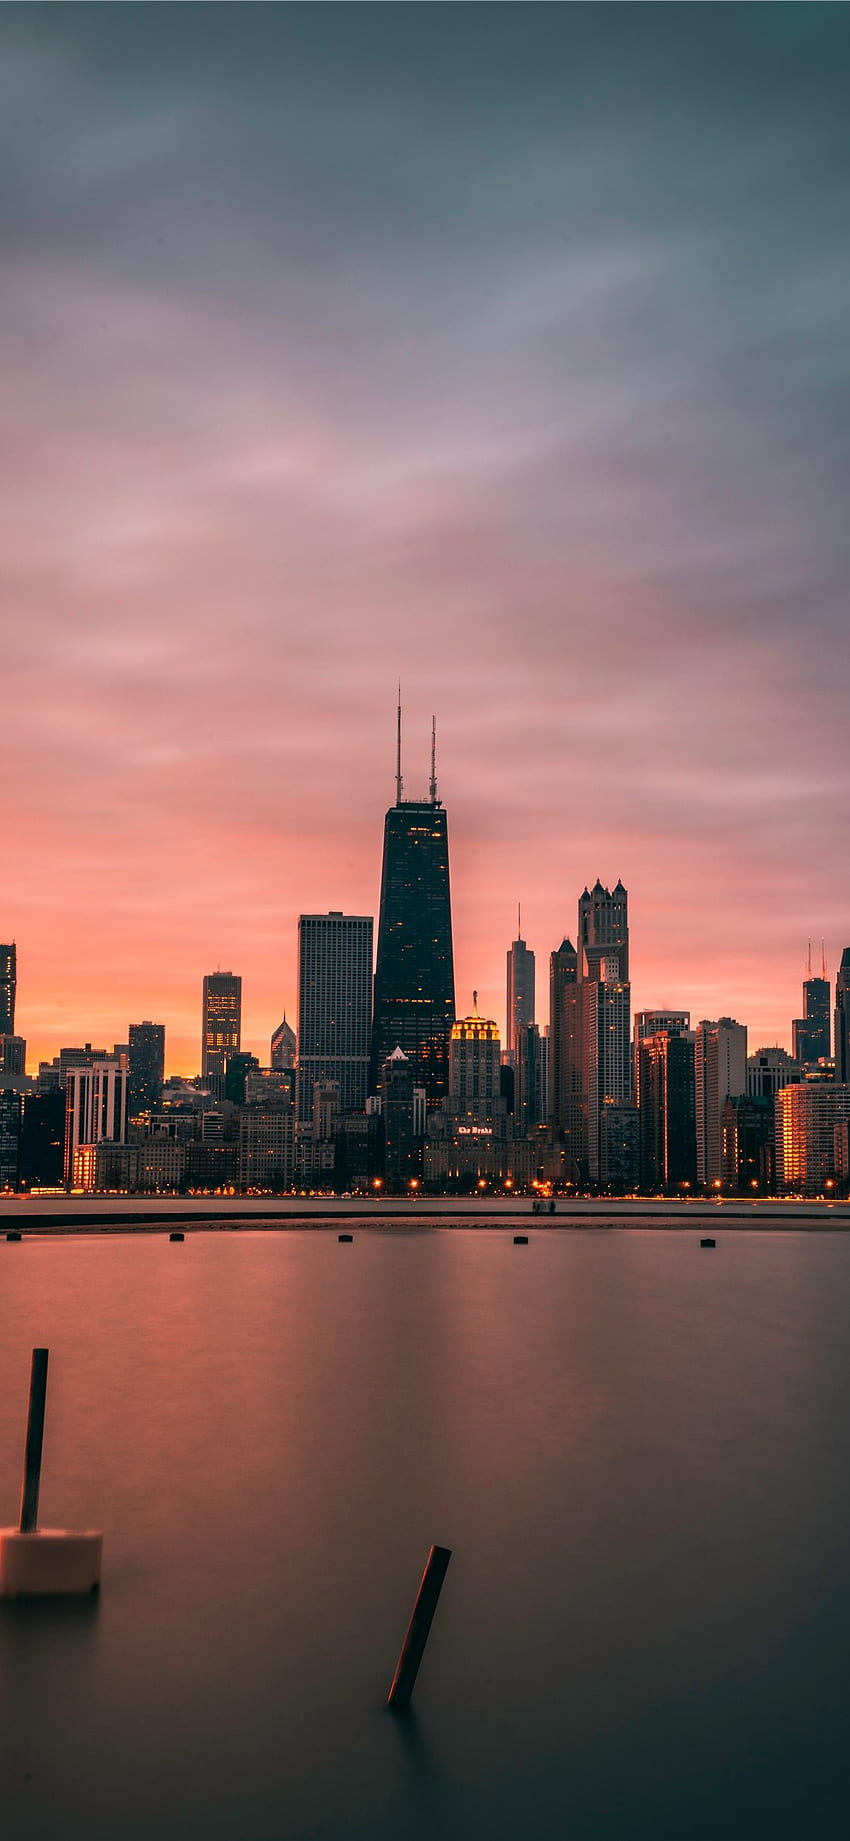 Best Chicago iPhone X, Chicago City HD phone wallpaper